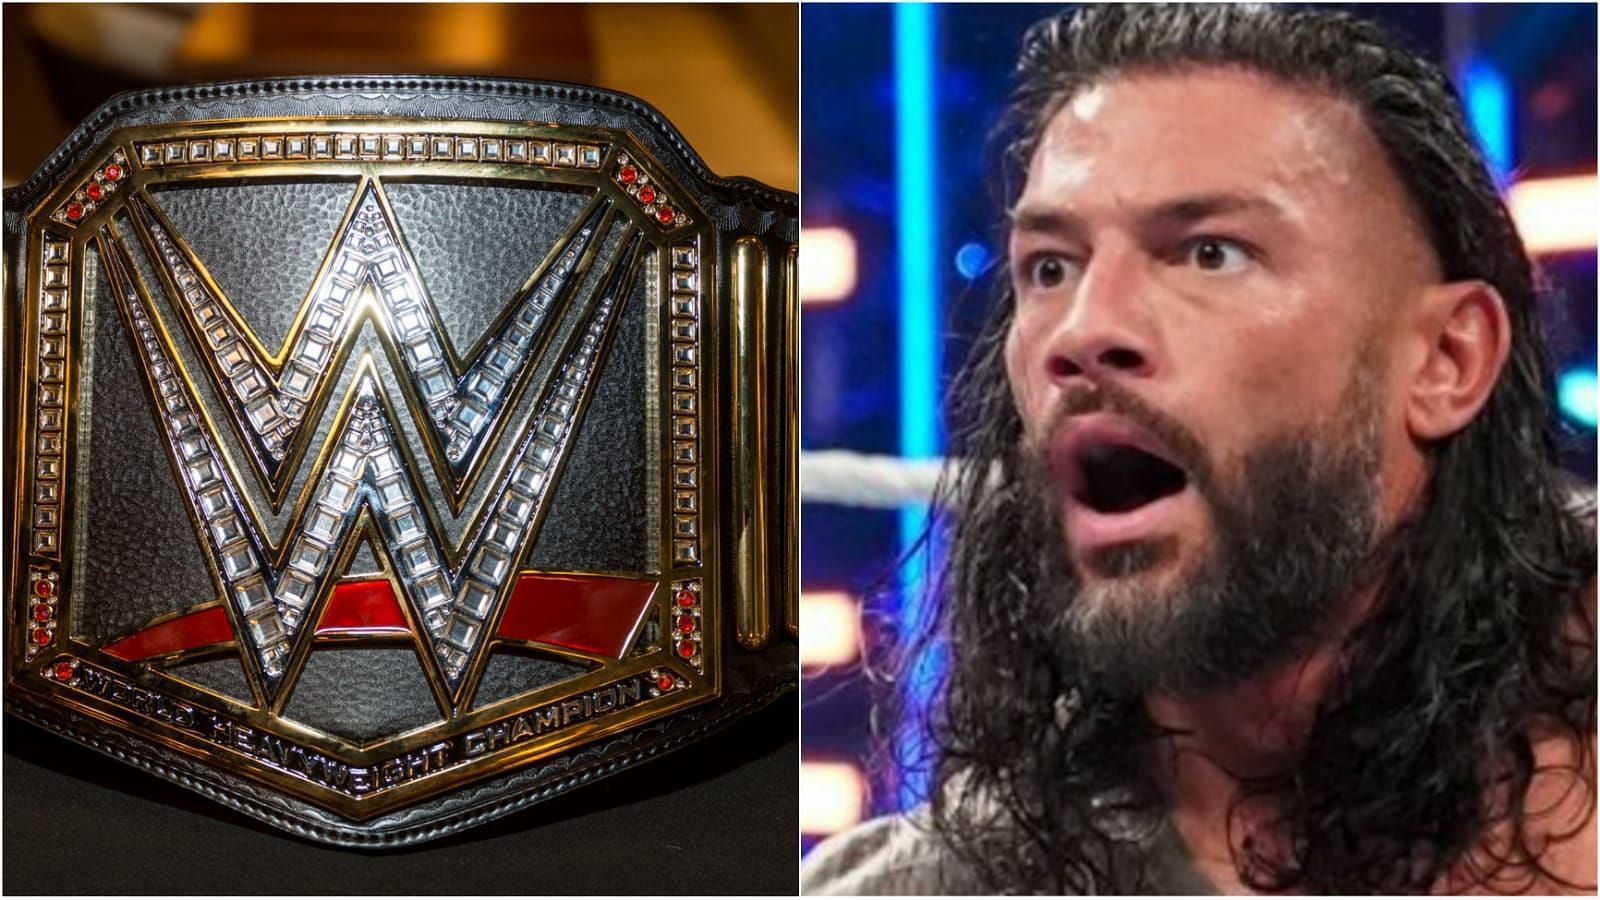 Roman Reigns is currently the top heel in WWE!